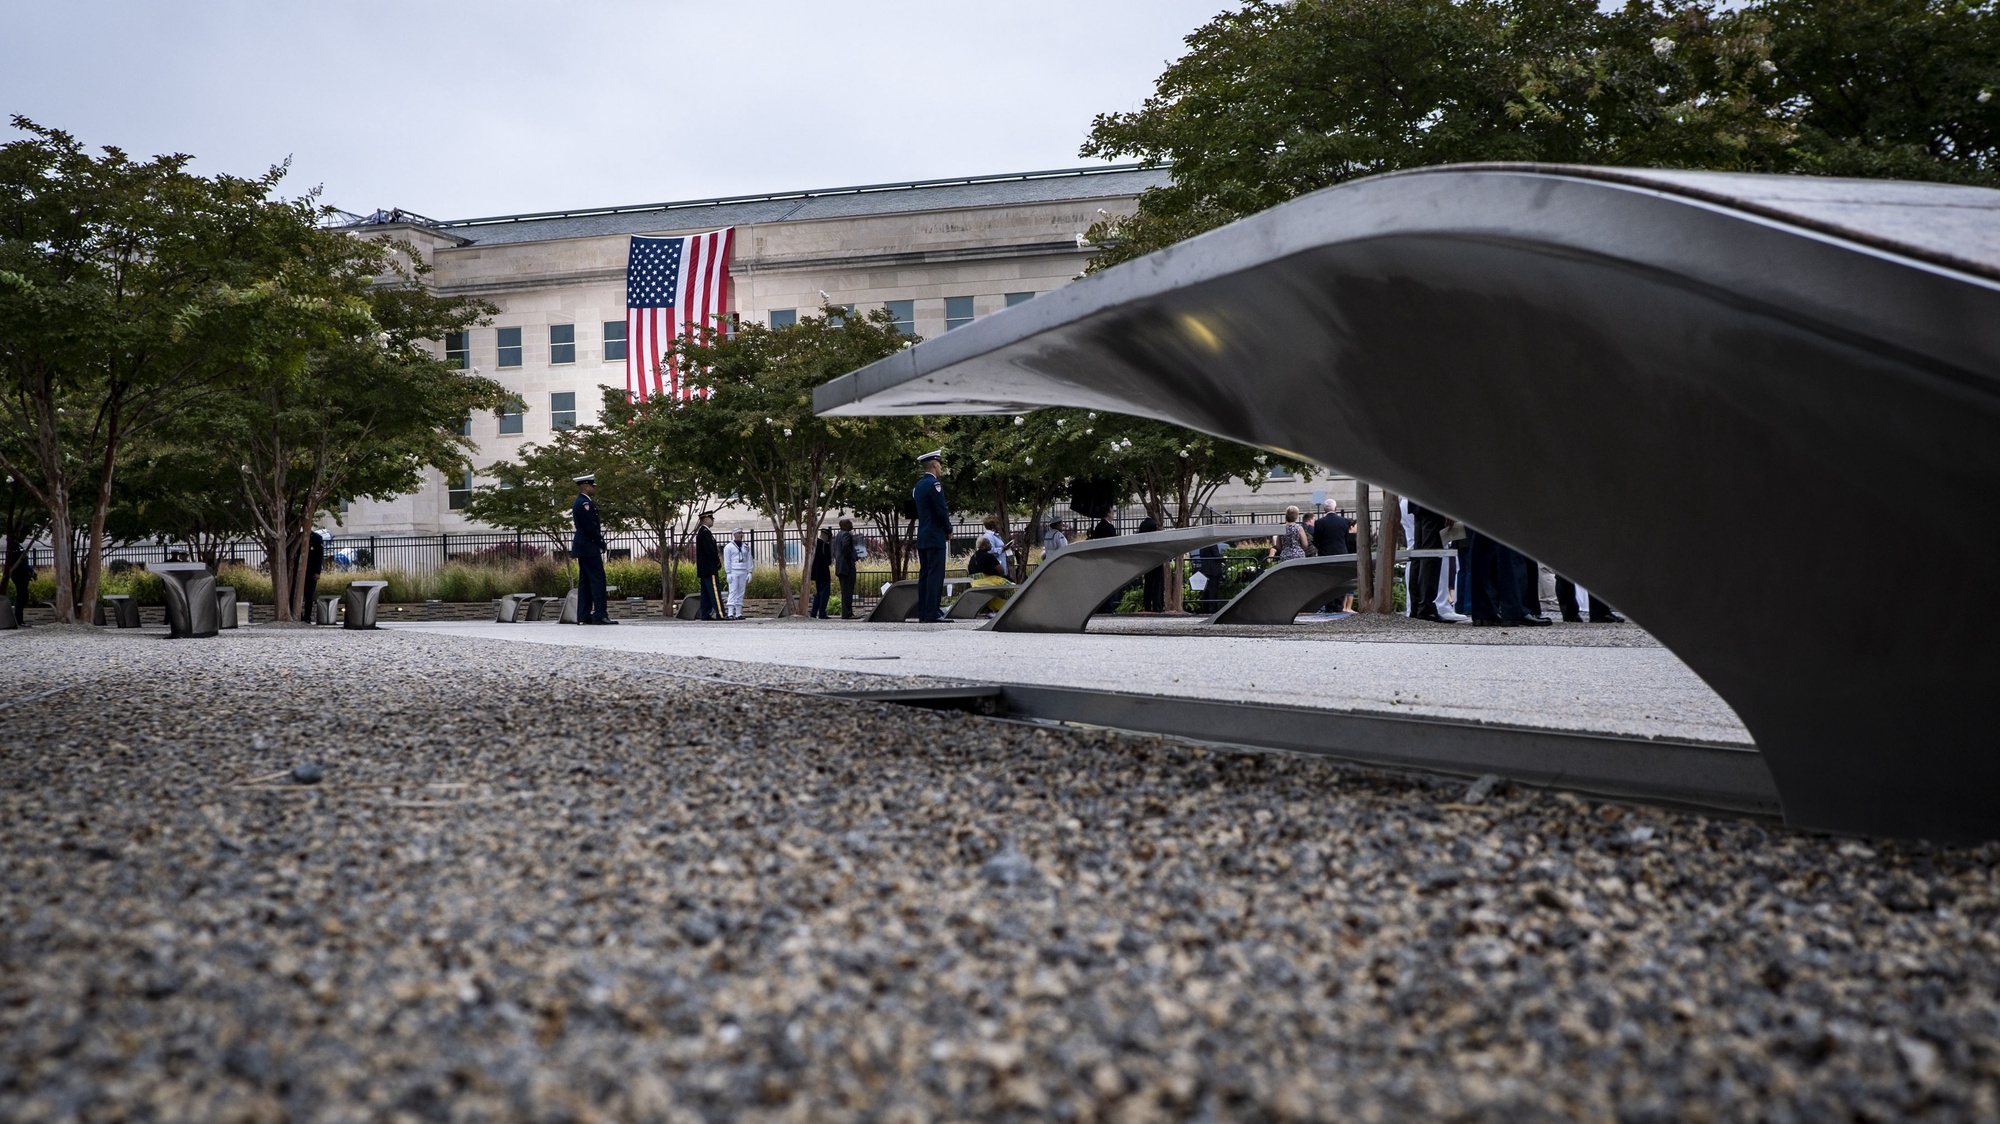 epa07835051 Military personnel at the Pentagon Memorial prepare for a remembrance ceremony of the 18th anniversary of the terrorist attacks on US soil, in Arlington, Virginia, USA, 11 September 2019. The ceremony commemorates the 184 people killed at the Pentagon when terrorists crashed an airliner into the building on 11 September 2001.  EPA/PETE MAROVICH